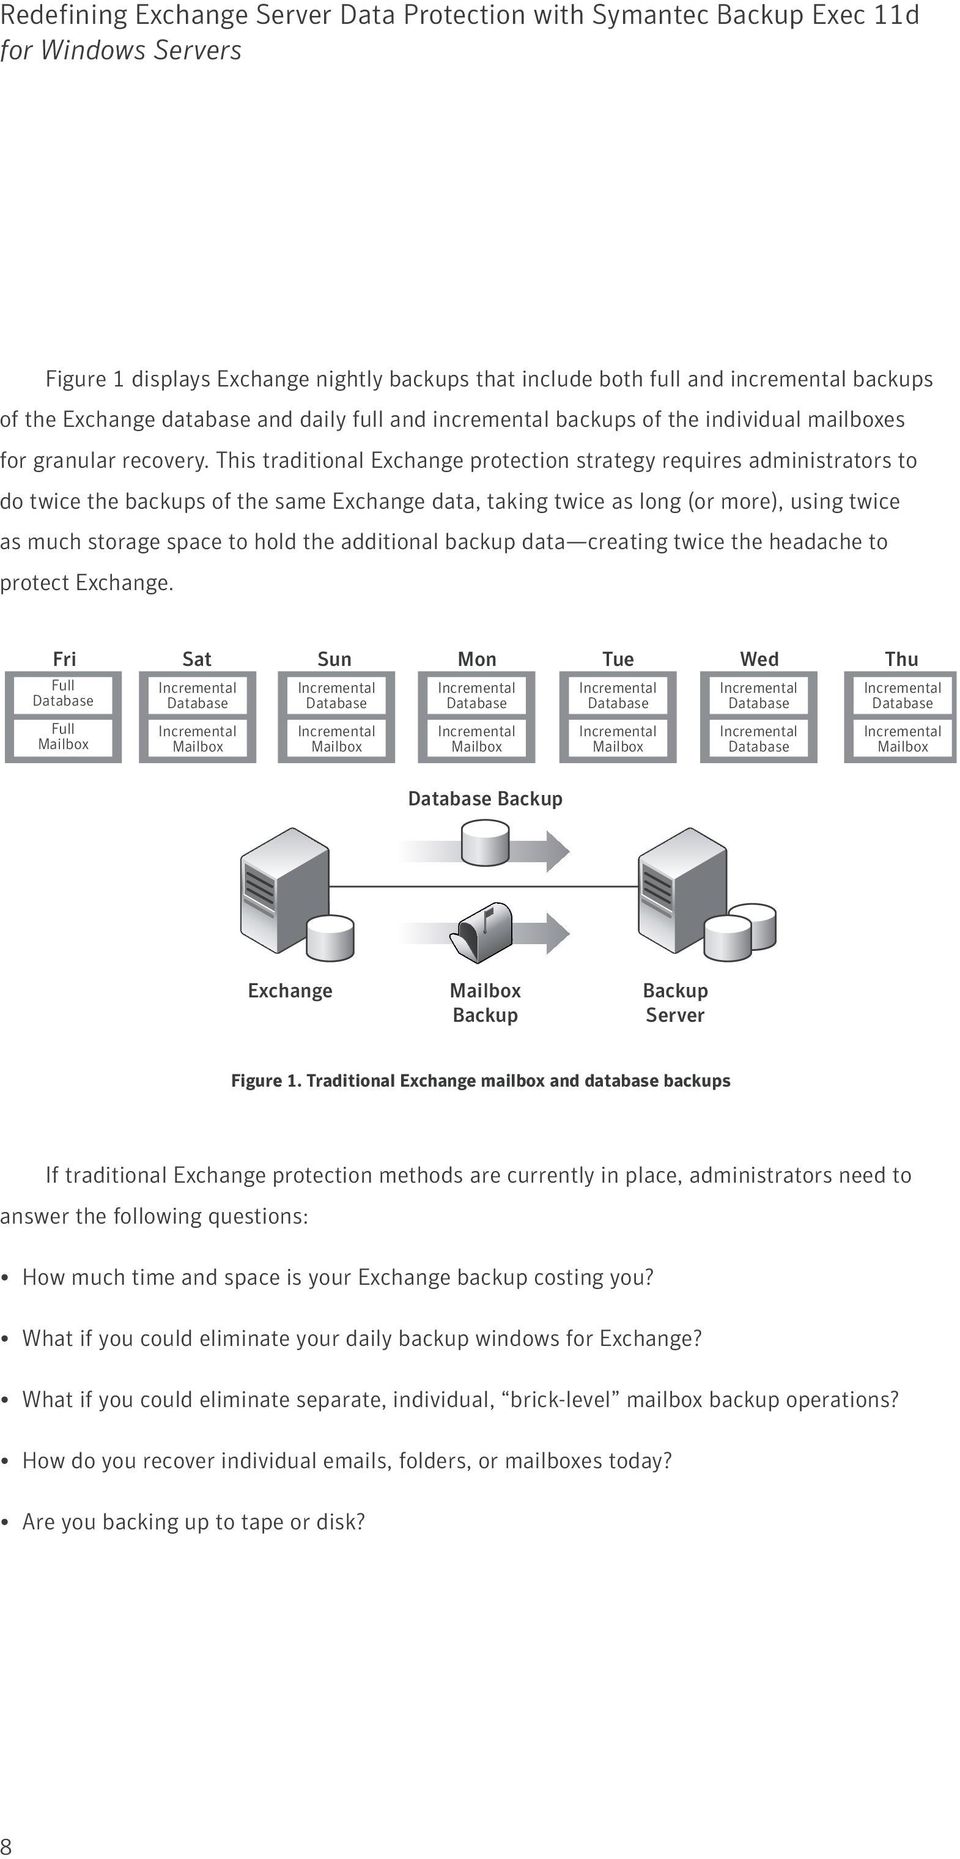 This traditional Exchange protection strategy requires administrators to do twice the backups of the same Exchange data, taking twice as long (or more), using twice as much storage space to hold the